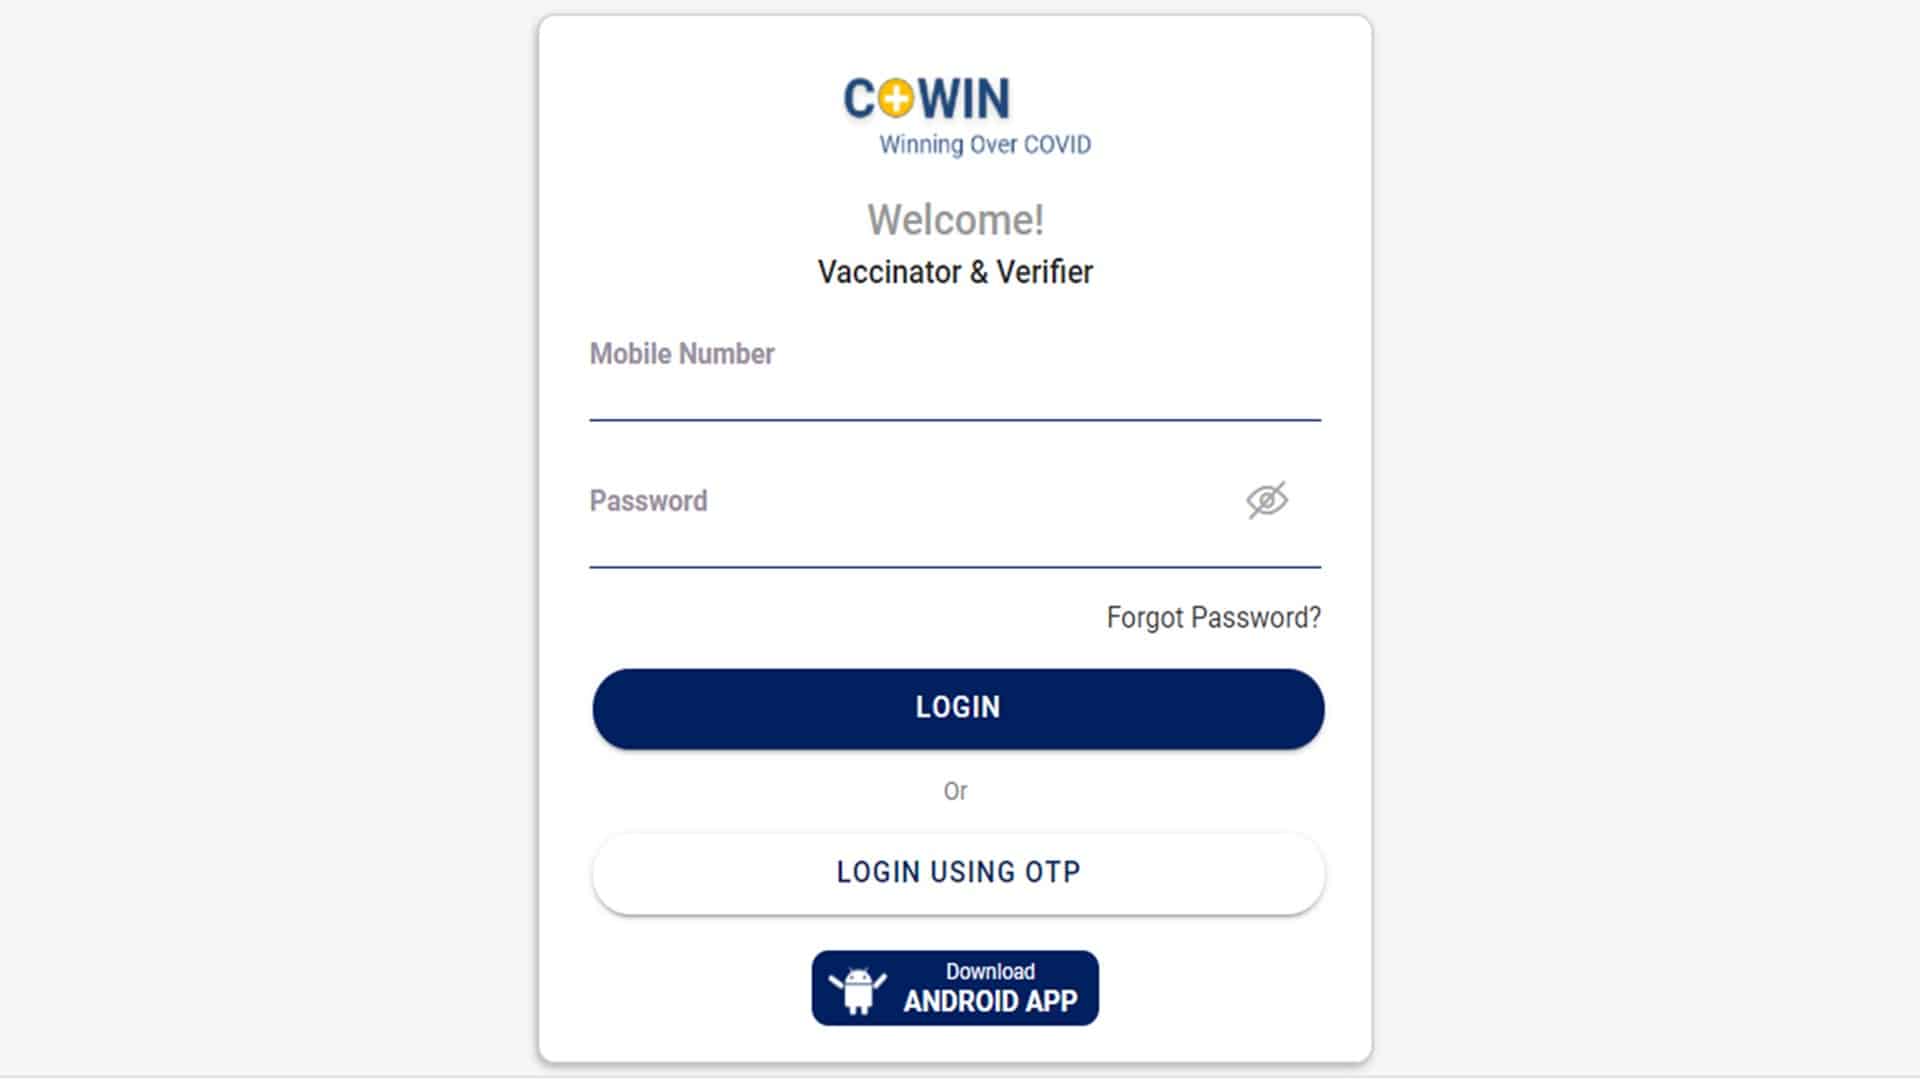 Finance Minister offers CoWIN platform to other nations for free